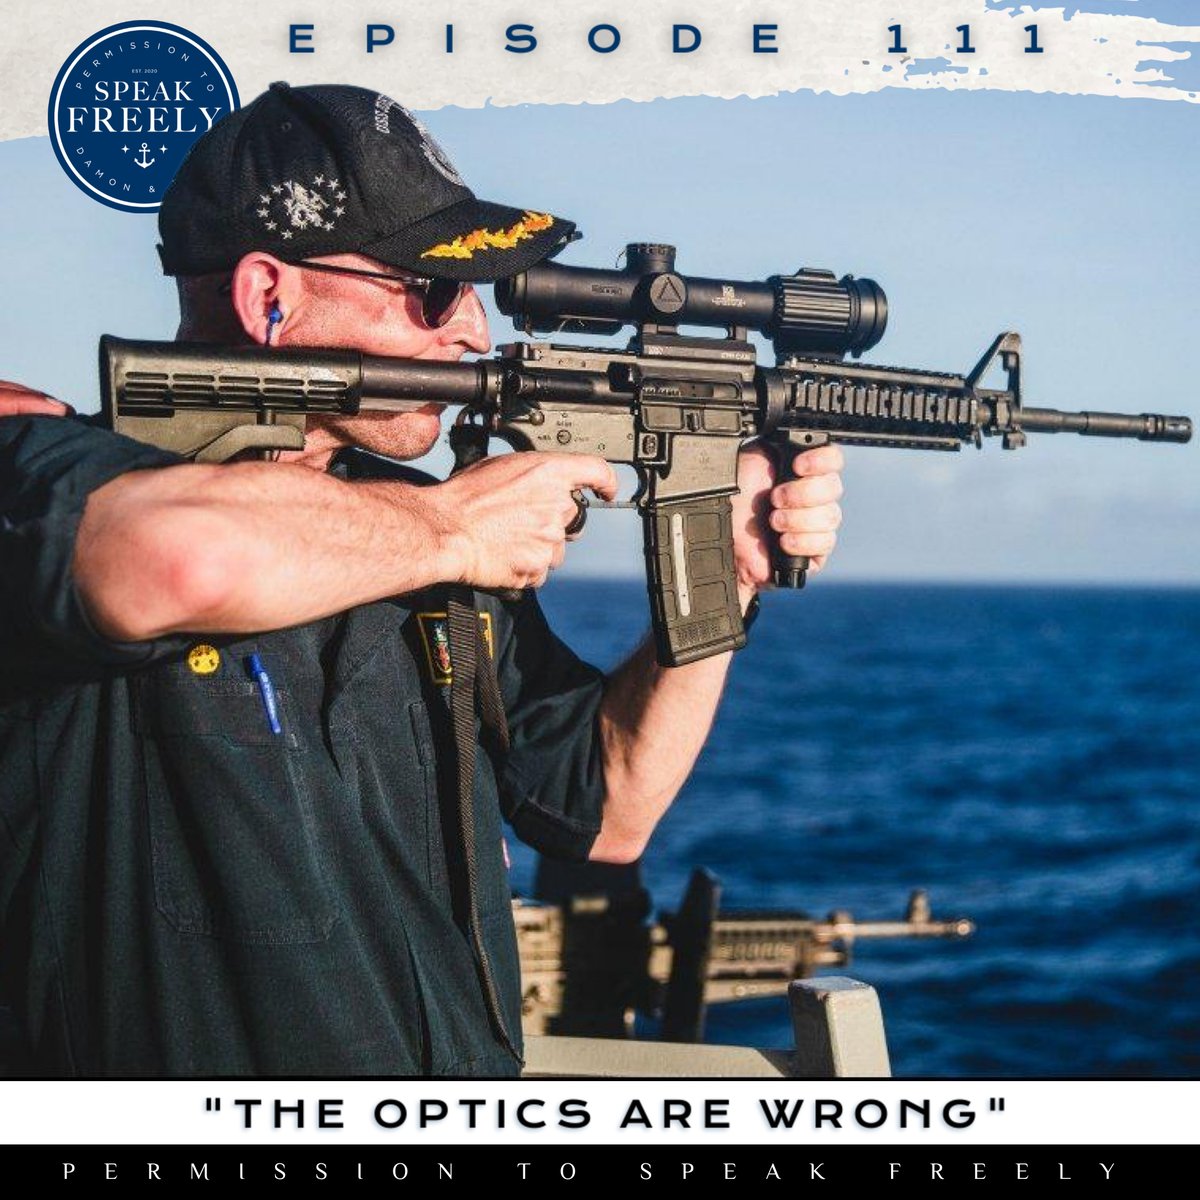 PERMISSION TO SPEAK FREELY | Episode 111 | “The Optics Are Wrong” is NOW AVAILABLE!
🎧 Apple
🎧 Spotify
🎧 SoundCloud
📺 YouTube
And more…
📌 Link: linktr.ee/Ptsfpodcast
#navypodcast #navy #military #navylife #militarylife